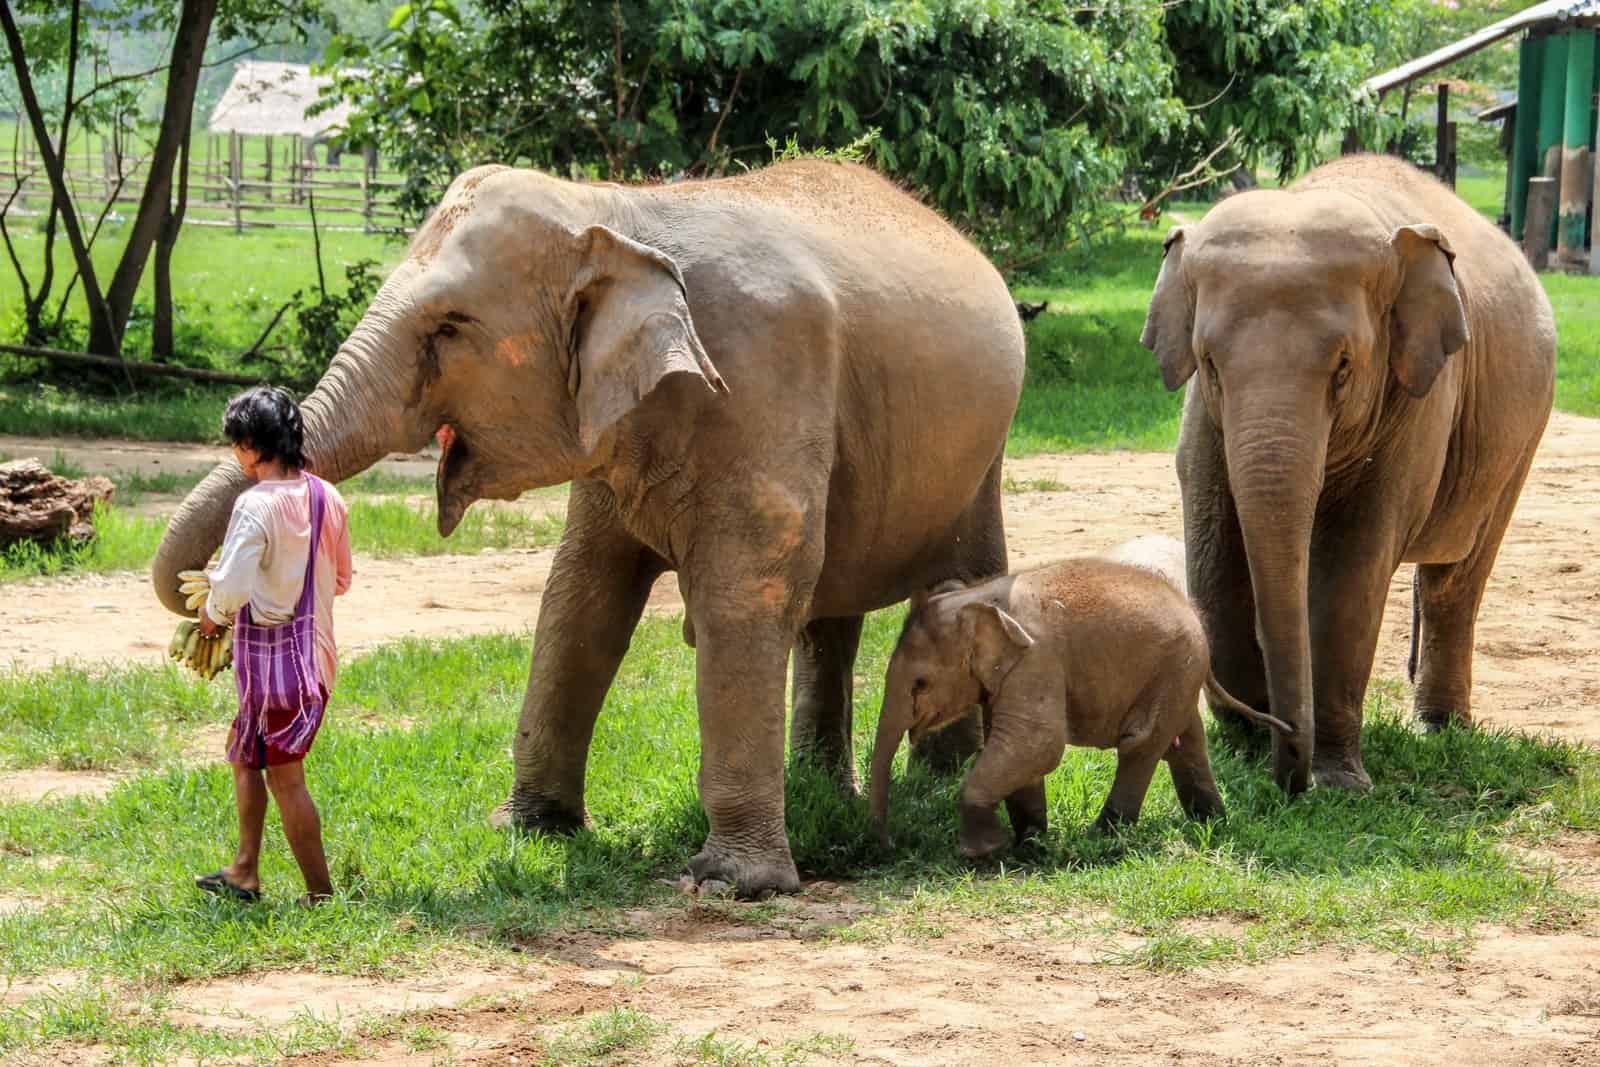 A mahout interacts with two adult elephants and a baby elephant, Elephants who are enjoying freedom at the Elephant Nature park project in Thailand after a life of abuse.